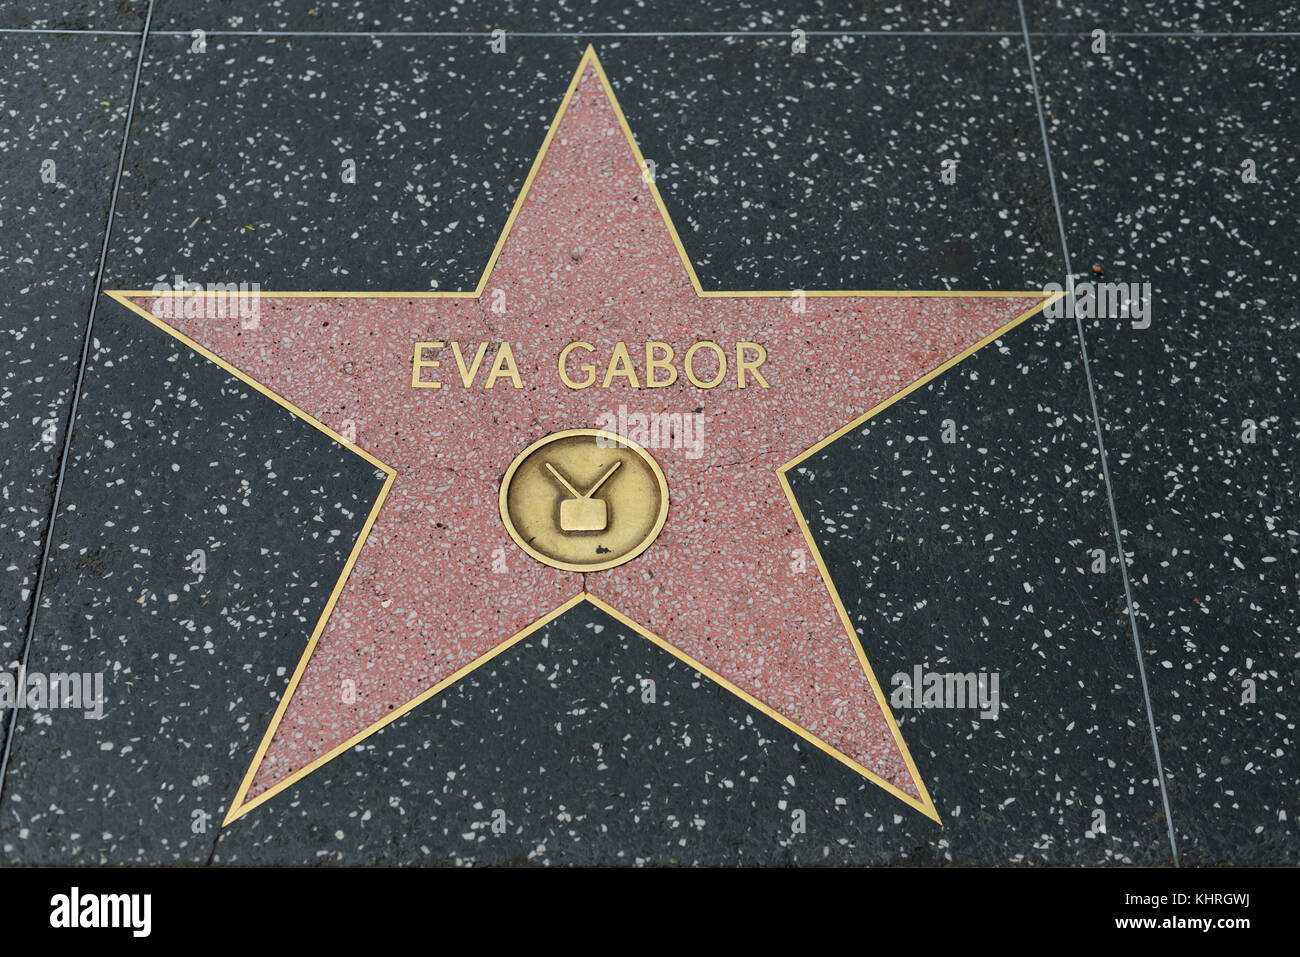 HOLLYWOOD, CA - DECEMBER 06: Eva Gabor star on the Hollywood Walk of Fame in Hollywood, California on Dec. 6, 2016. Stock Photo